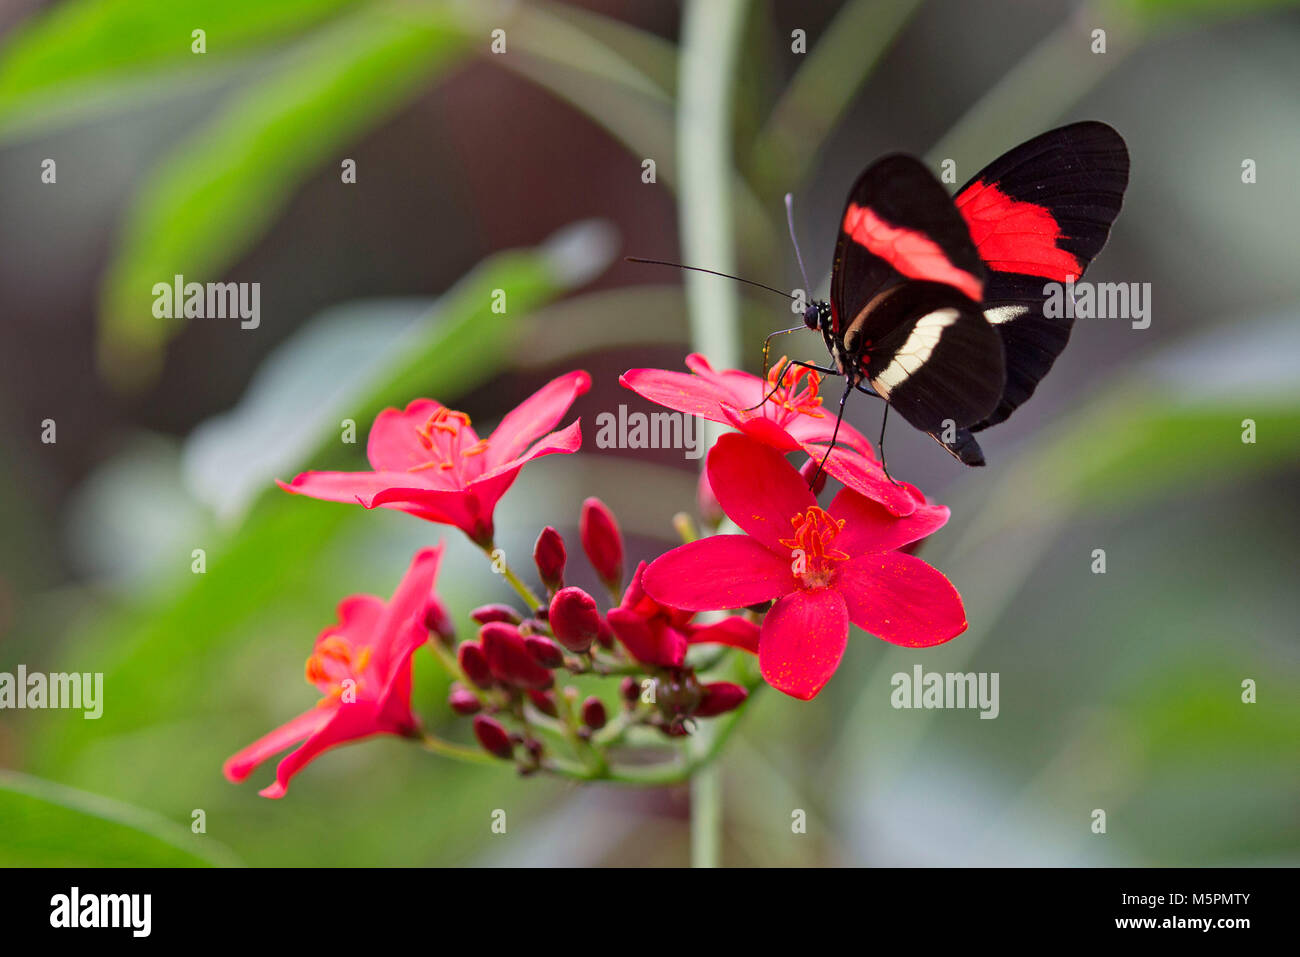 Red and black postman butterfly on red flowers Stock Photo